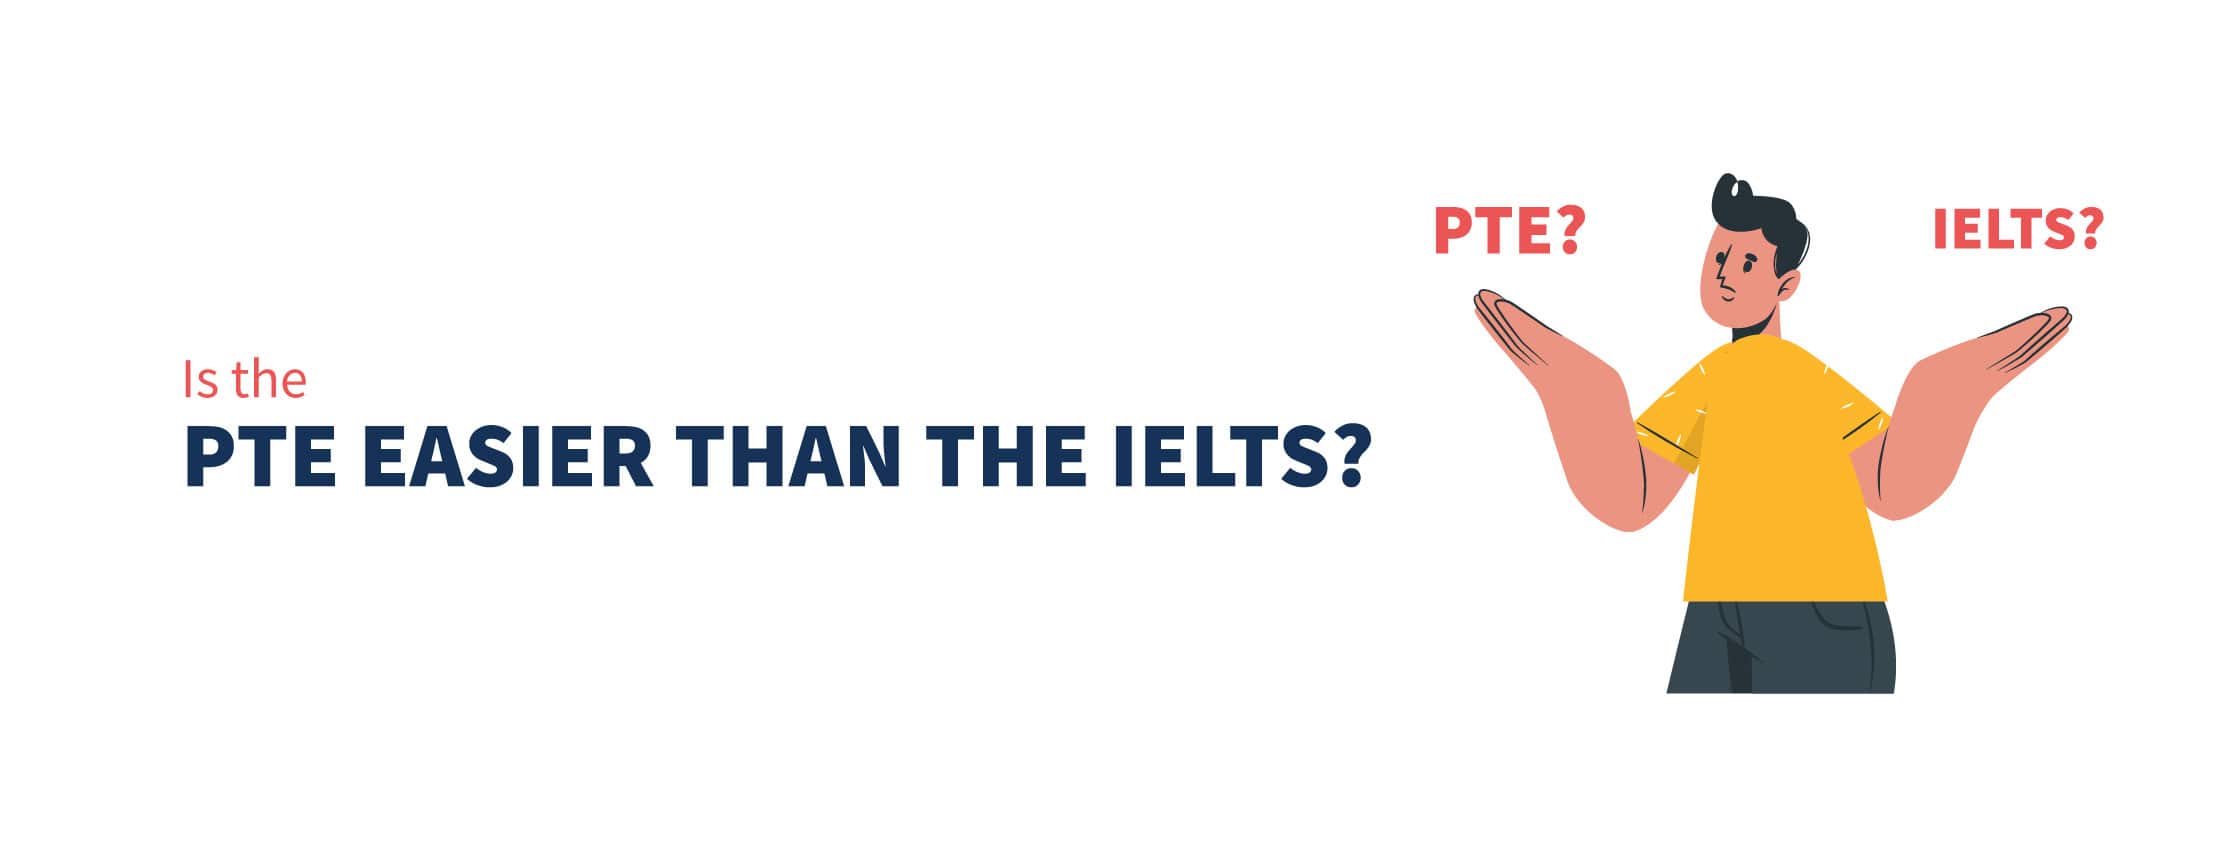 Is the PTE Easier than the IELTS?